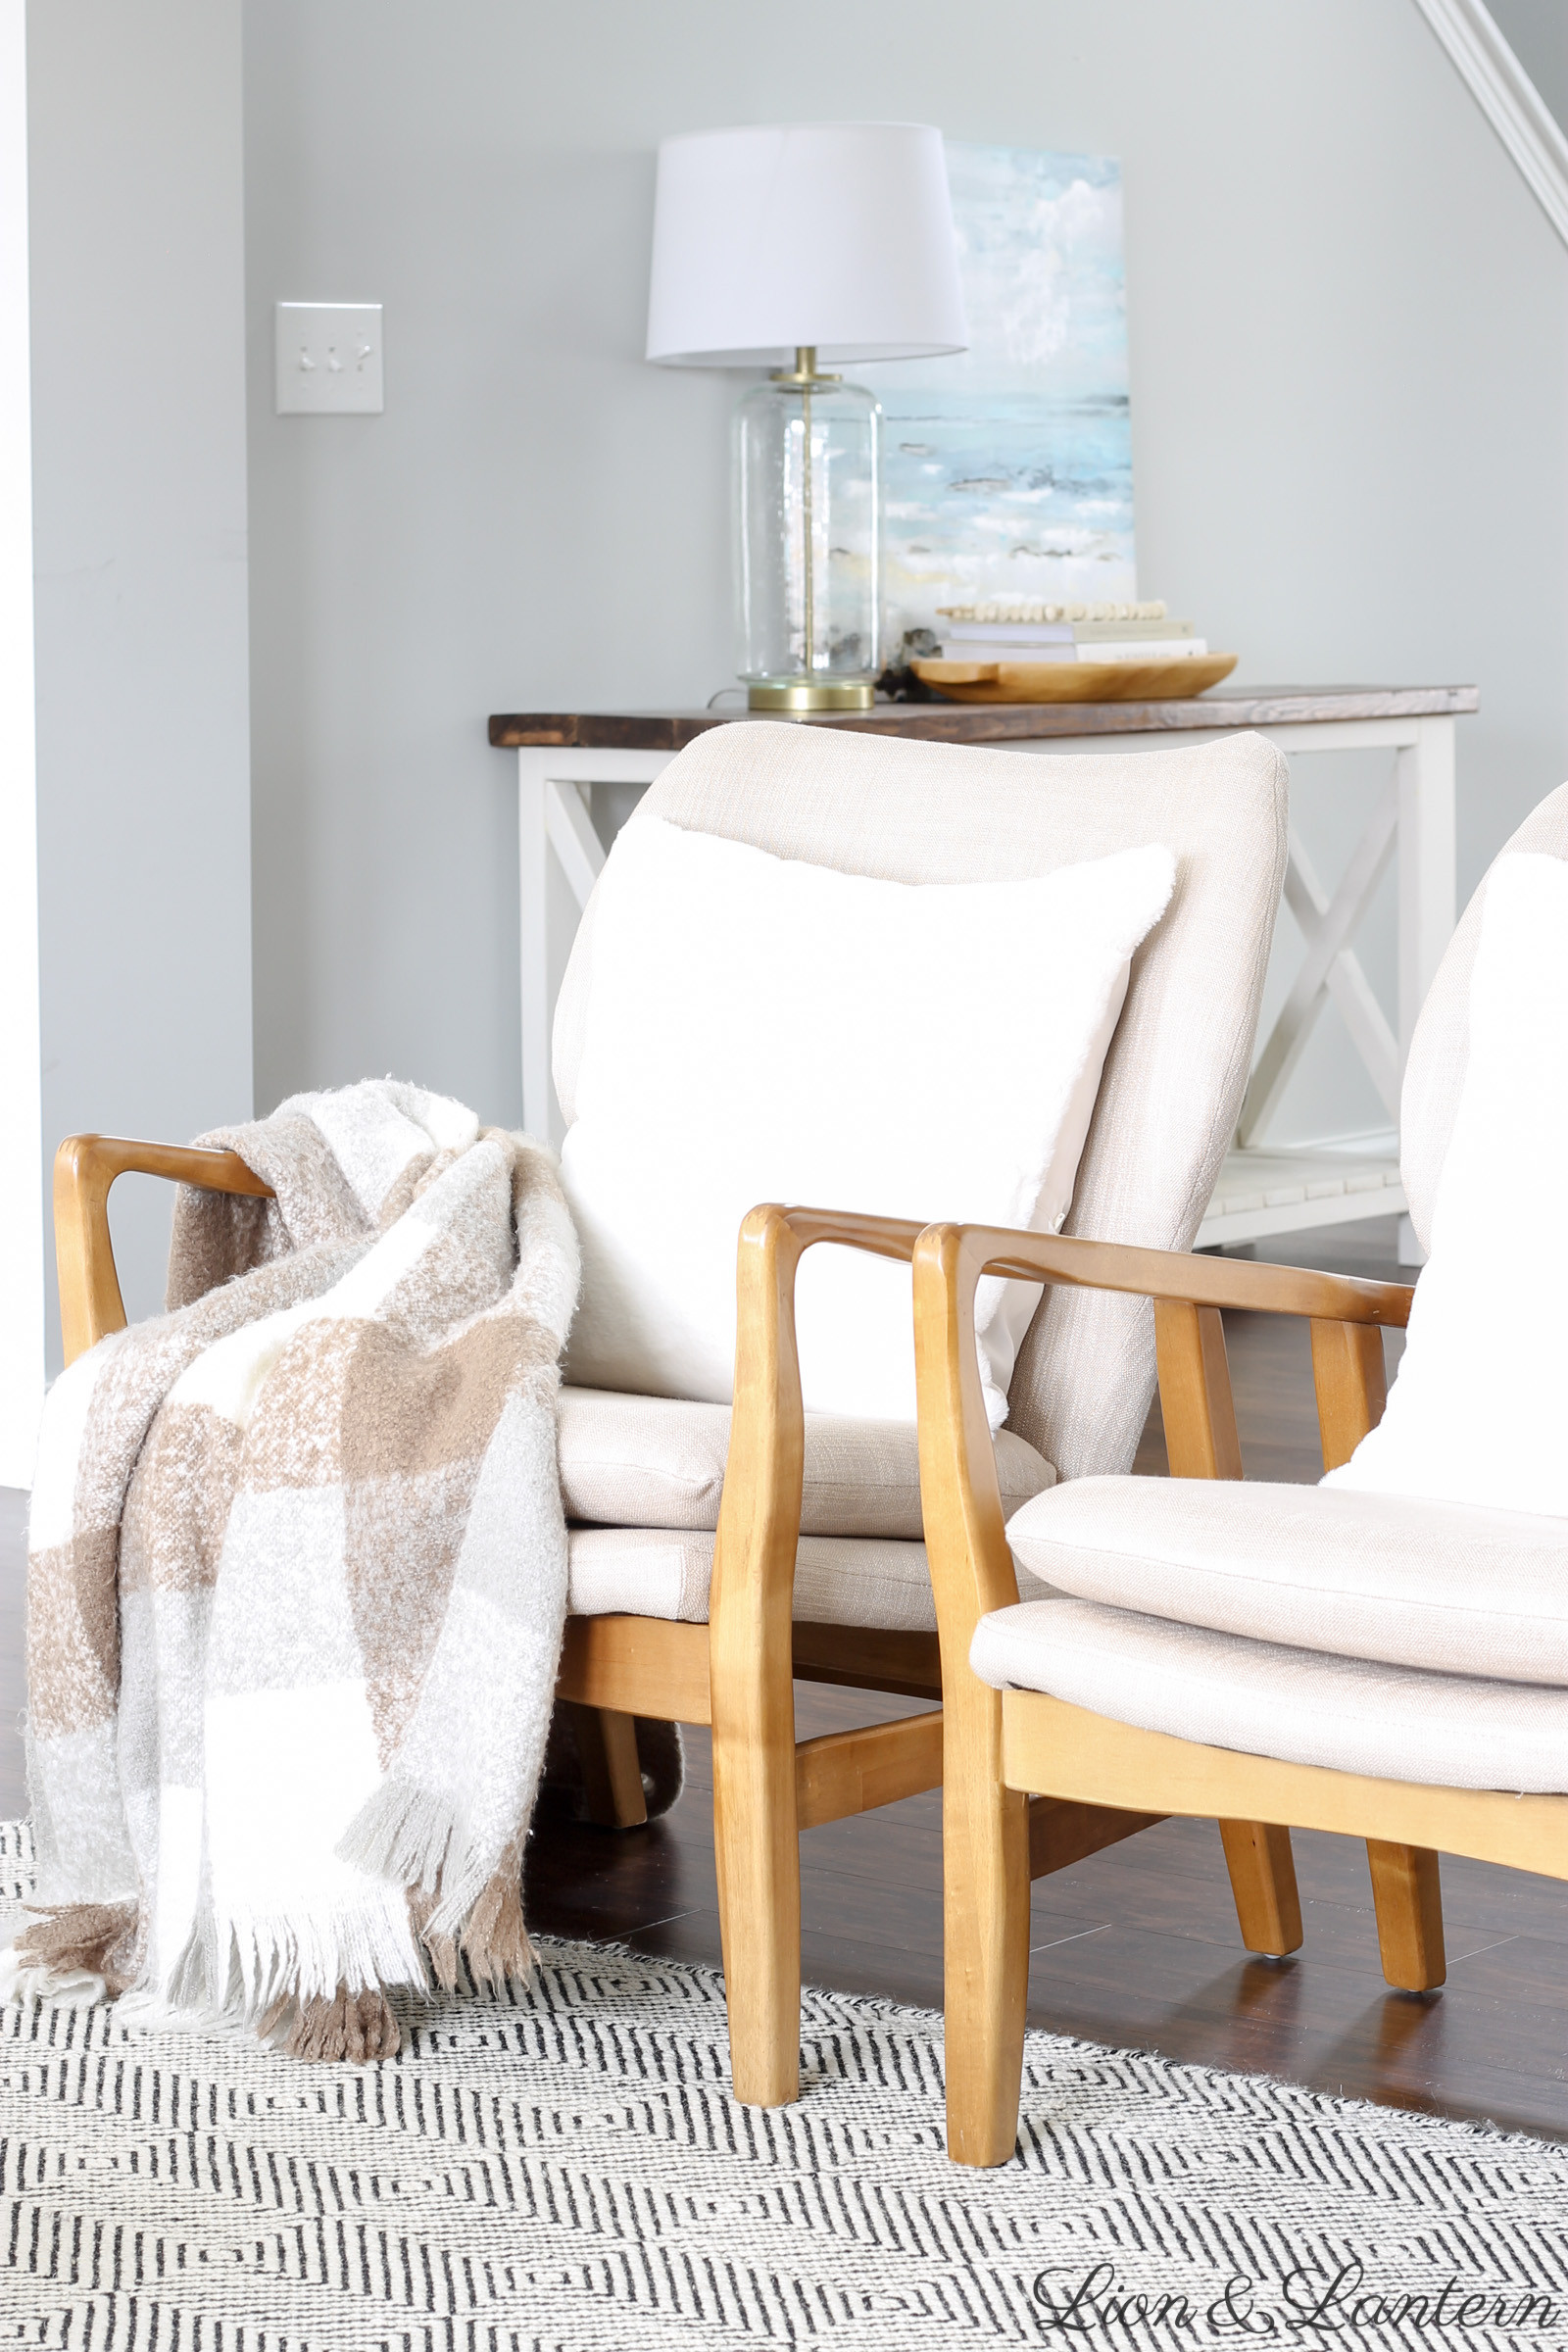 Casual Chairs For Living Room
 Coastal Modern Affordable Accent Chairs Caitlin Marie Design